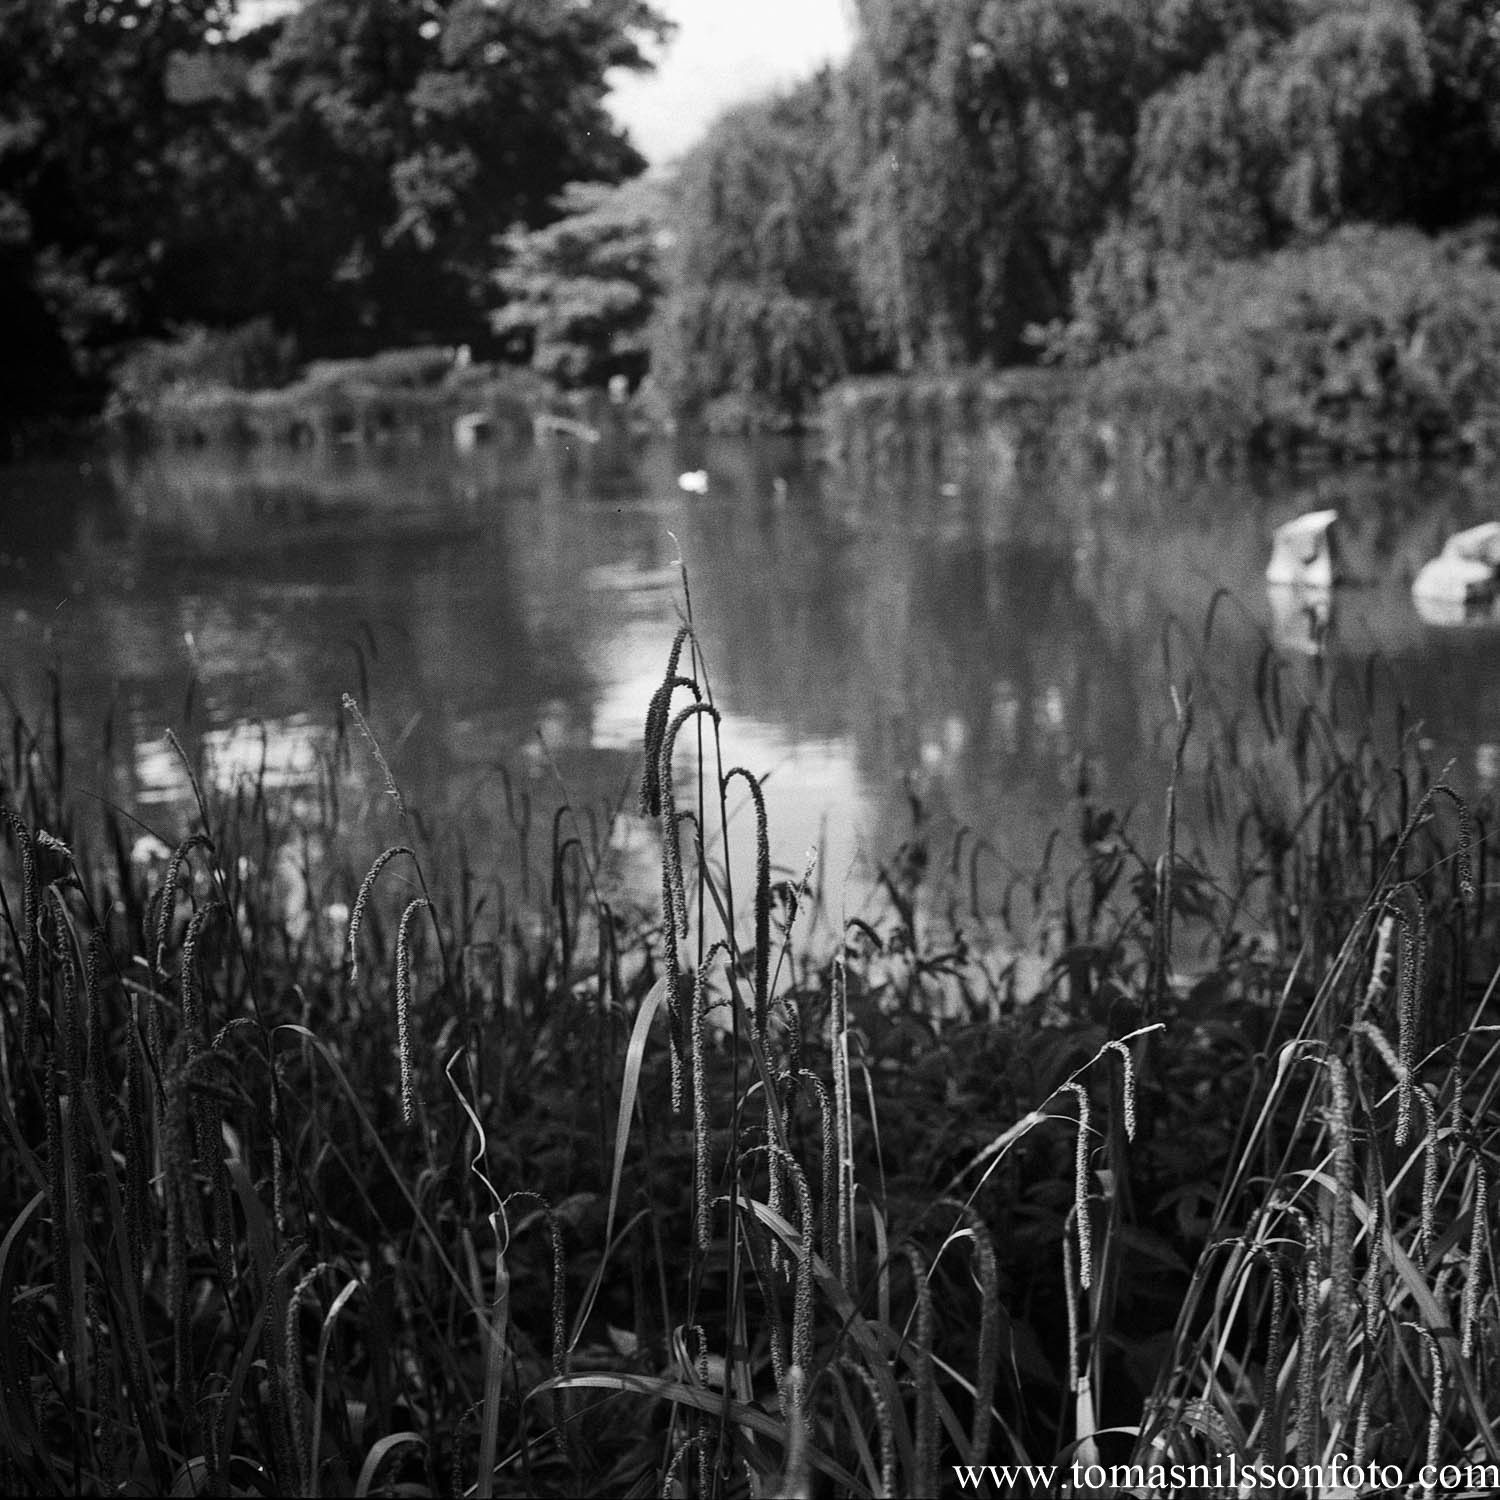 Day 195 - July 14: At the pond